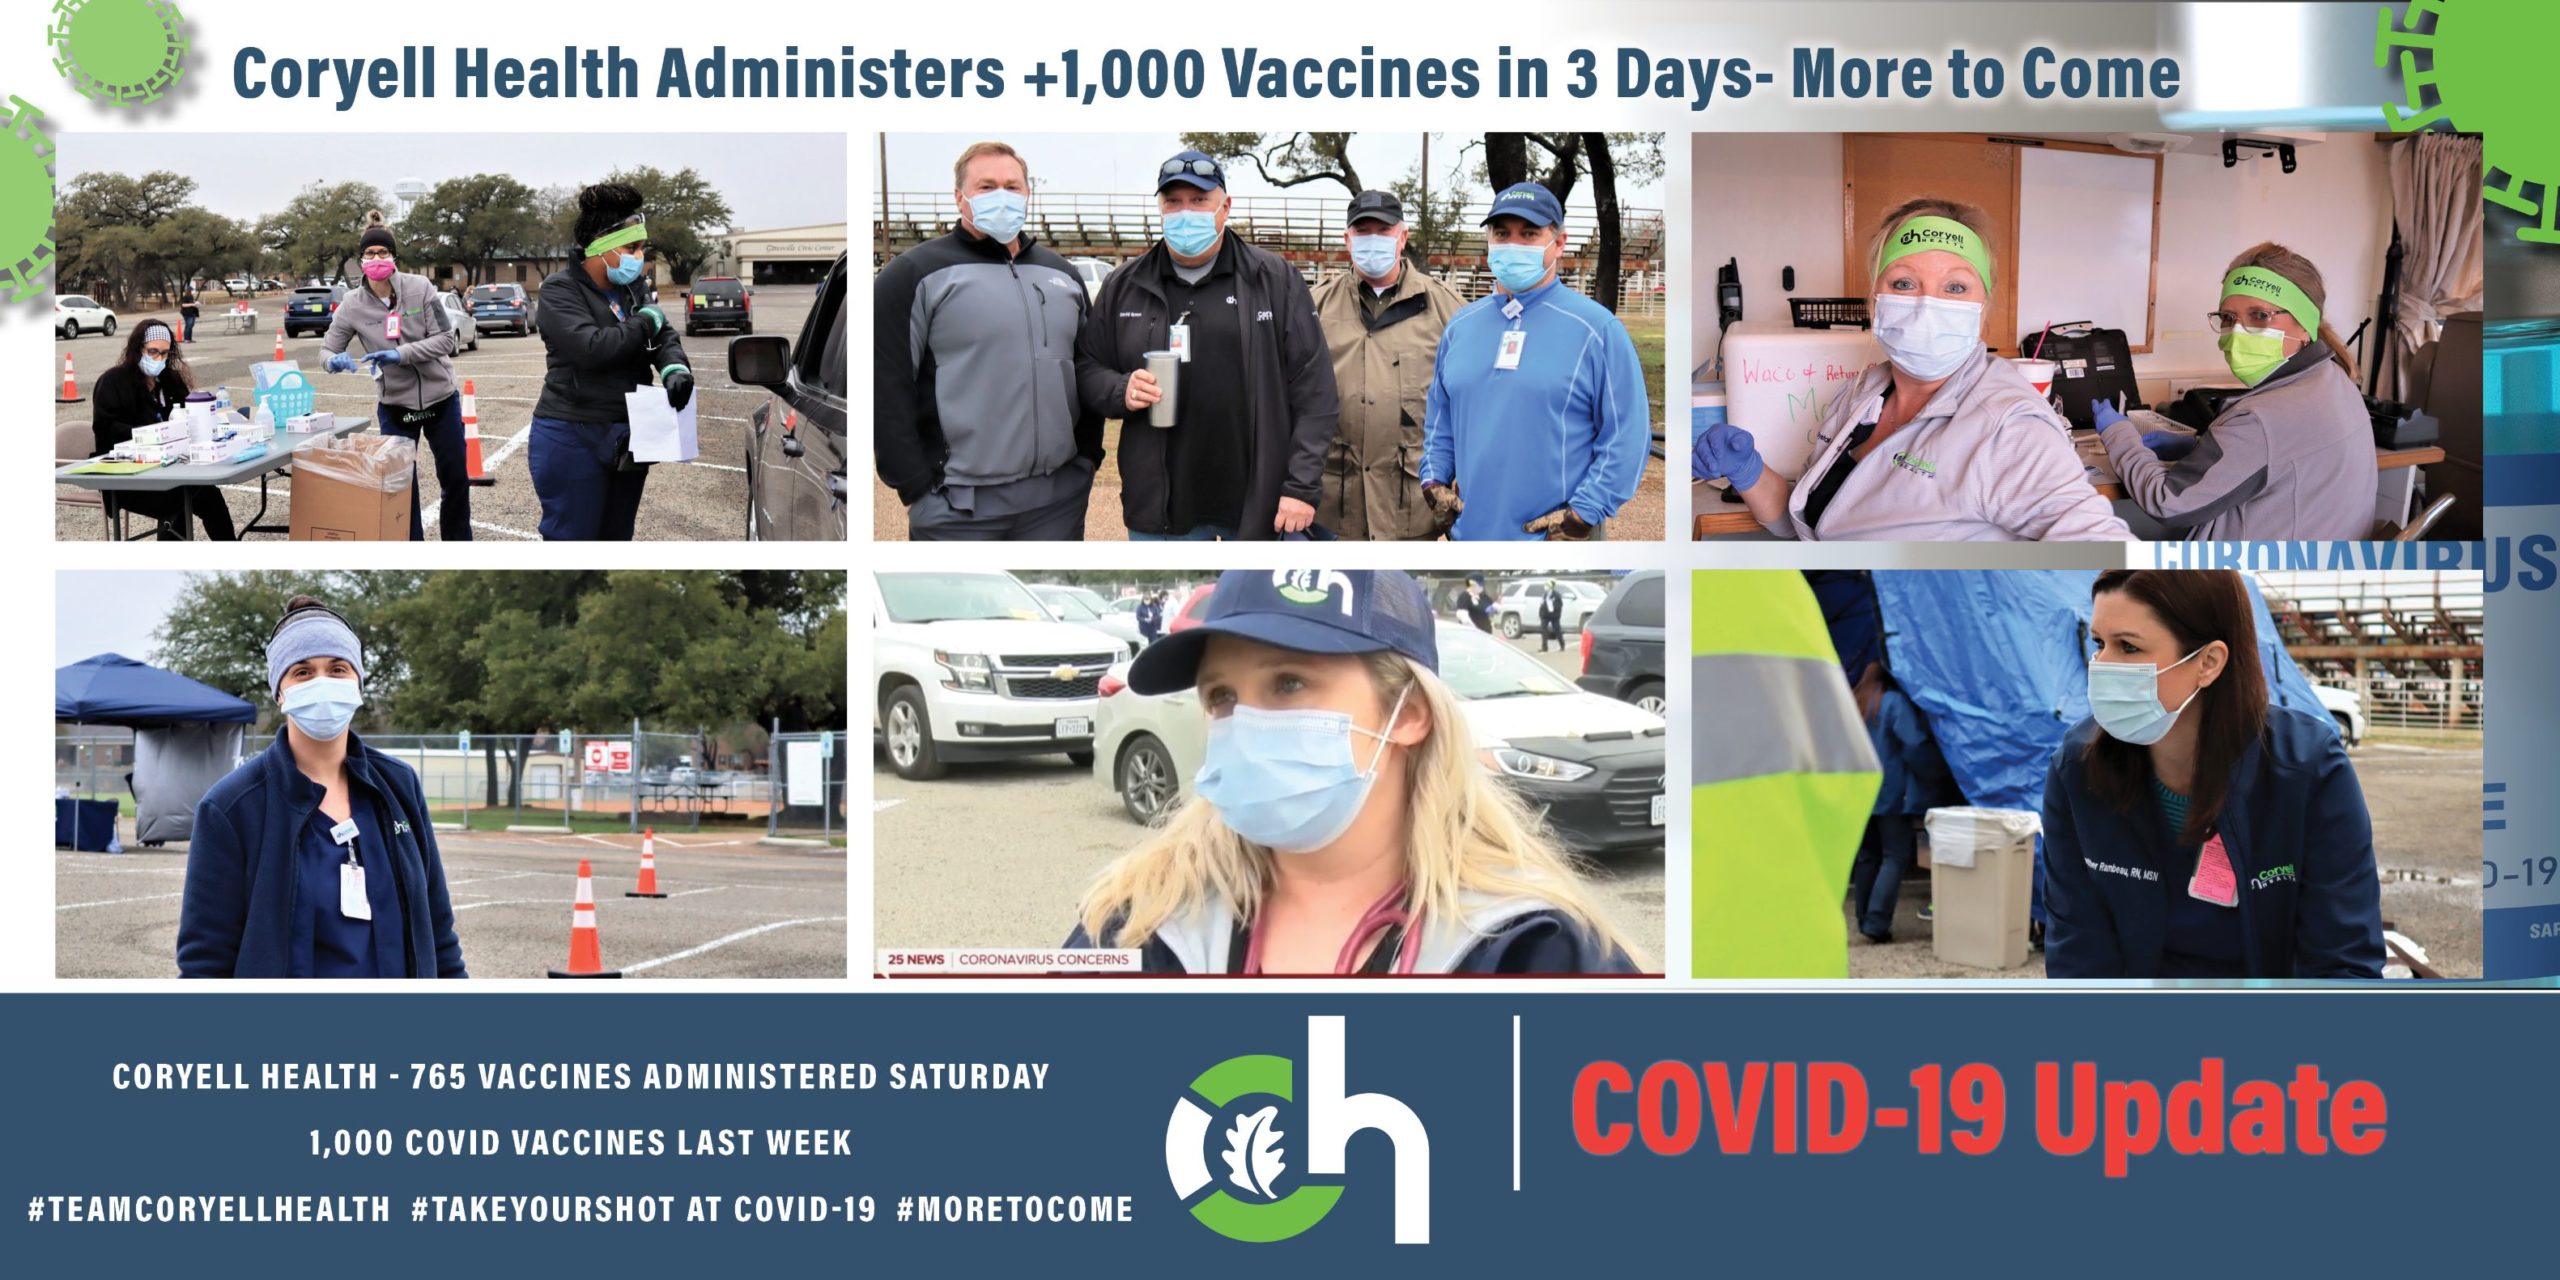 Coryell Health Administers +1,000 Vaccines in 3 Days- Currently Awaiting More to Come